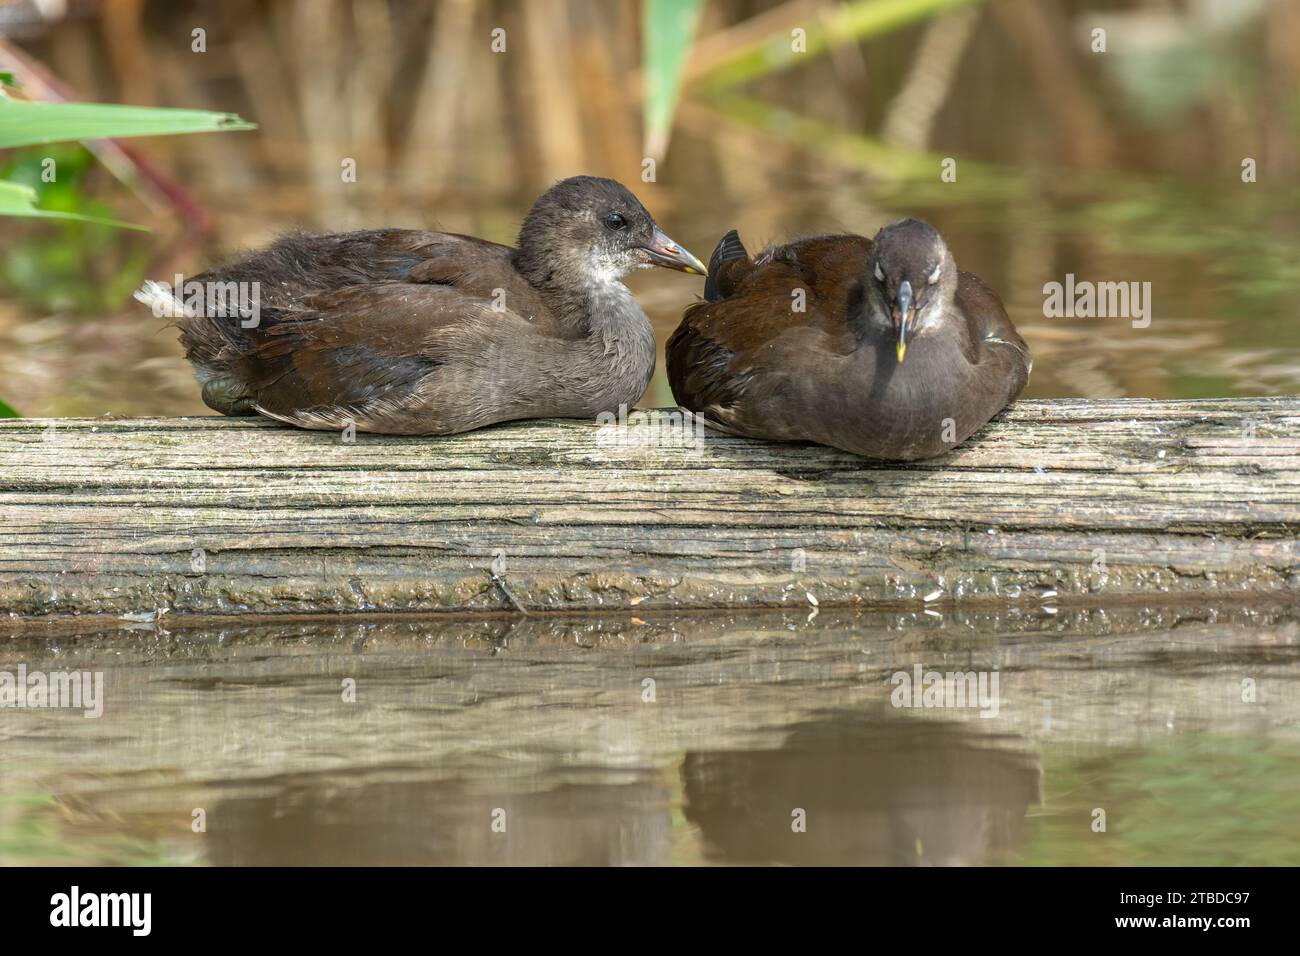 Two young young common moorhen (Gallinula chloropus) resting together on a tree trunk in a river. Bas-Rhin, Alsace, Grand Est, France, Europe. Stock Photo